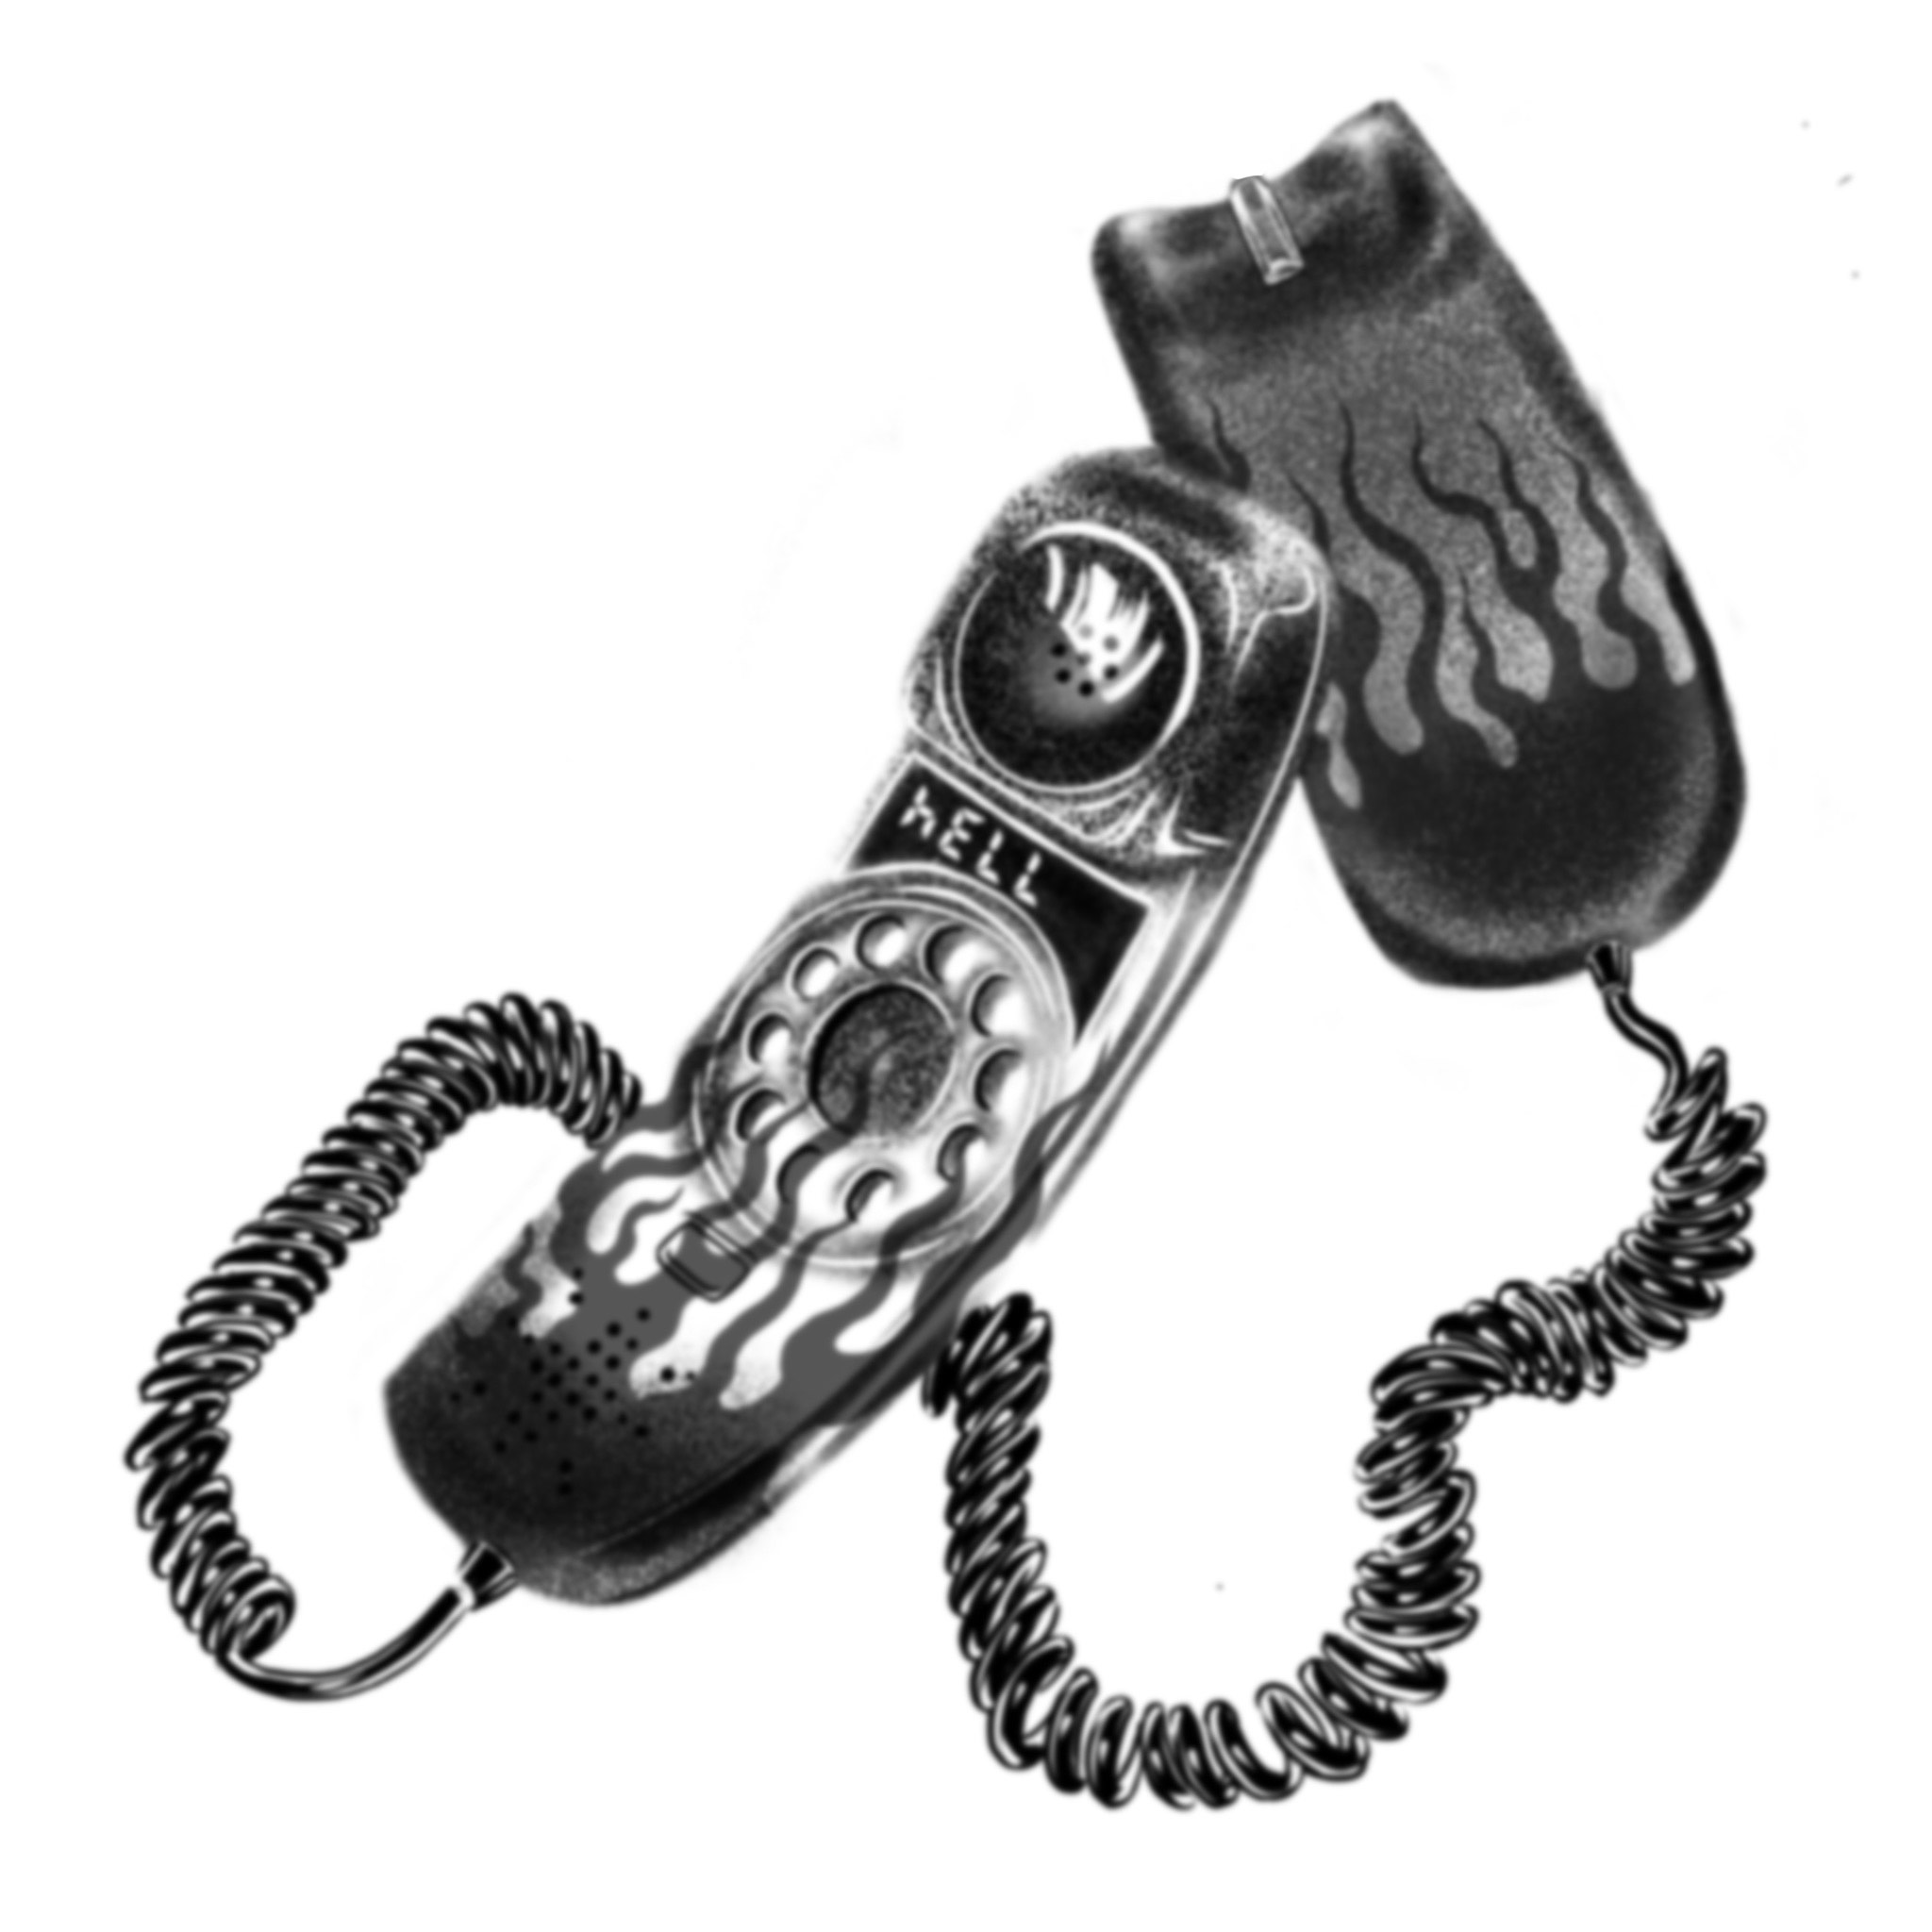 A rotary style phone with the word Hell on the display